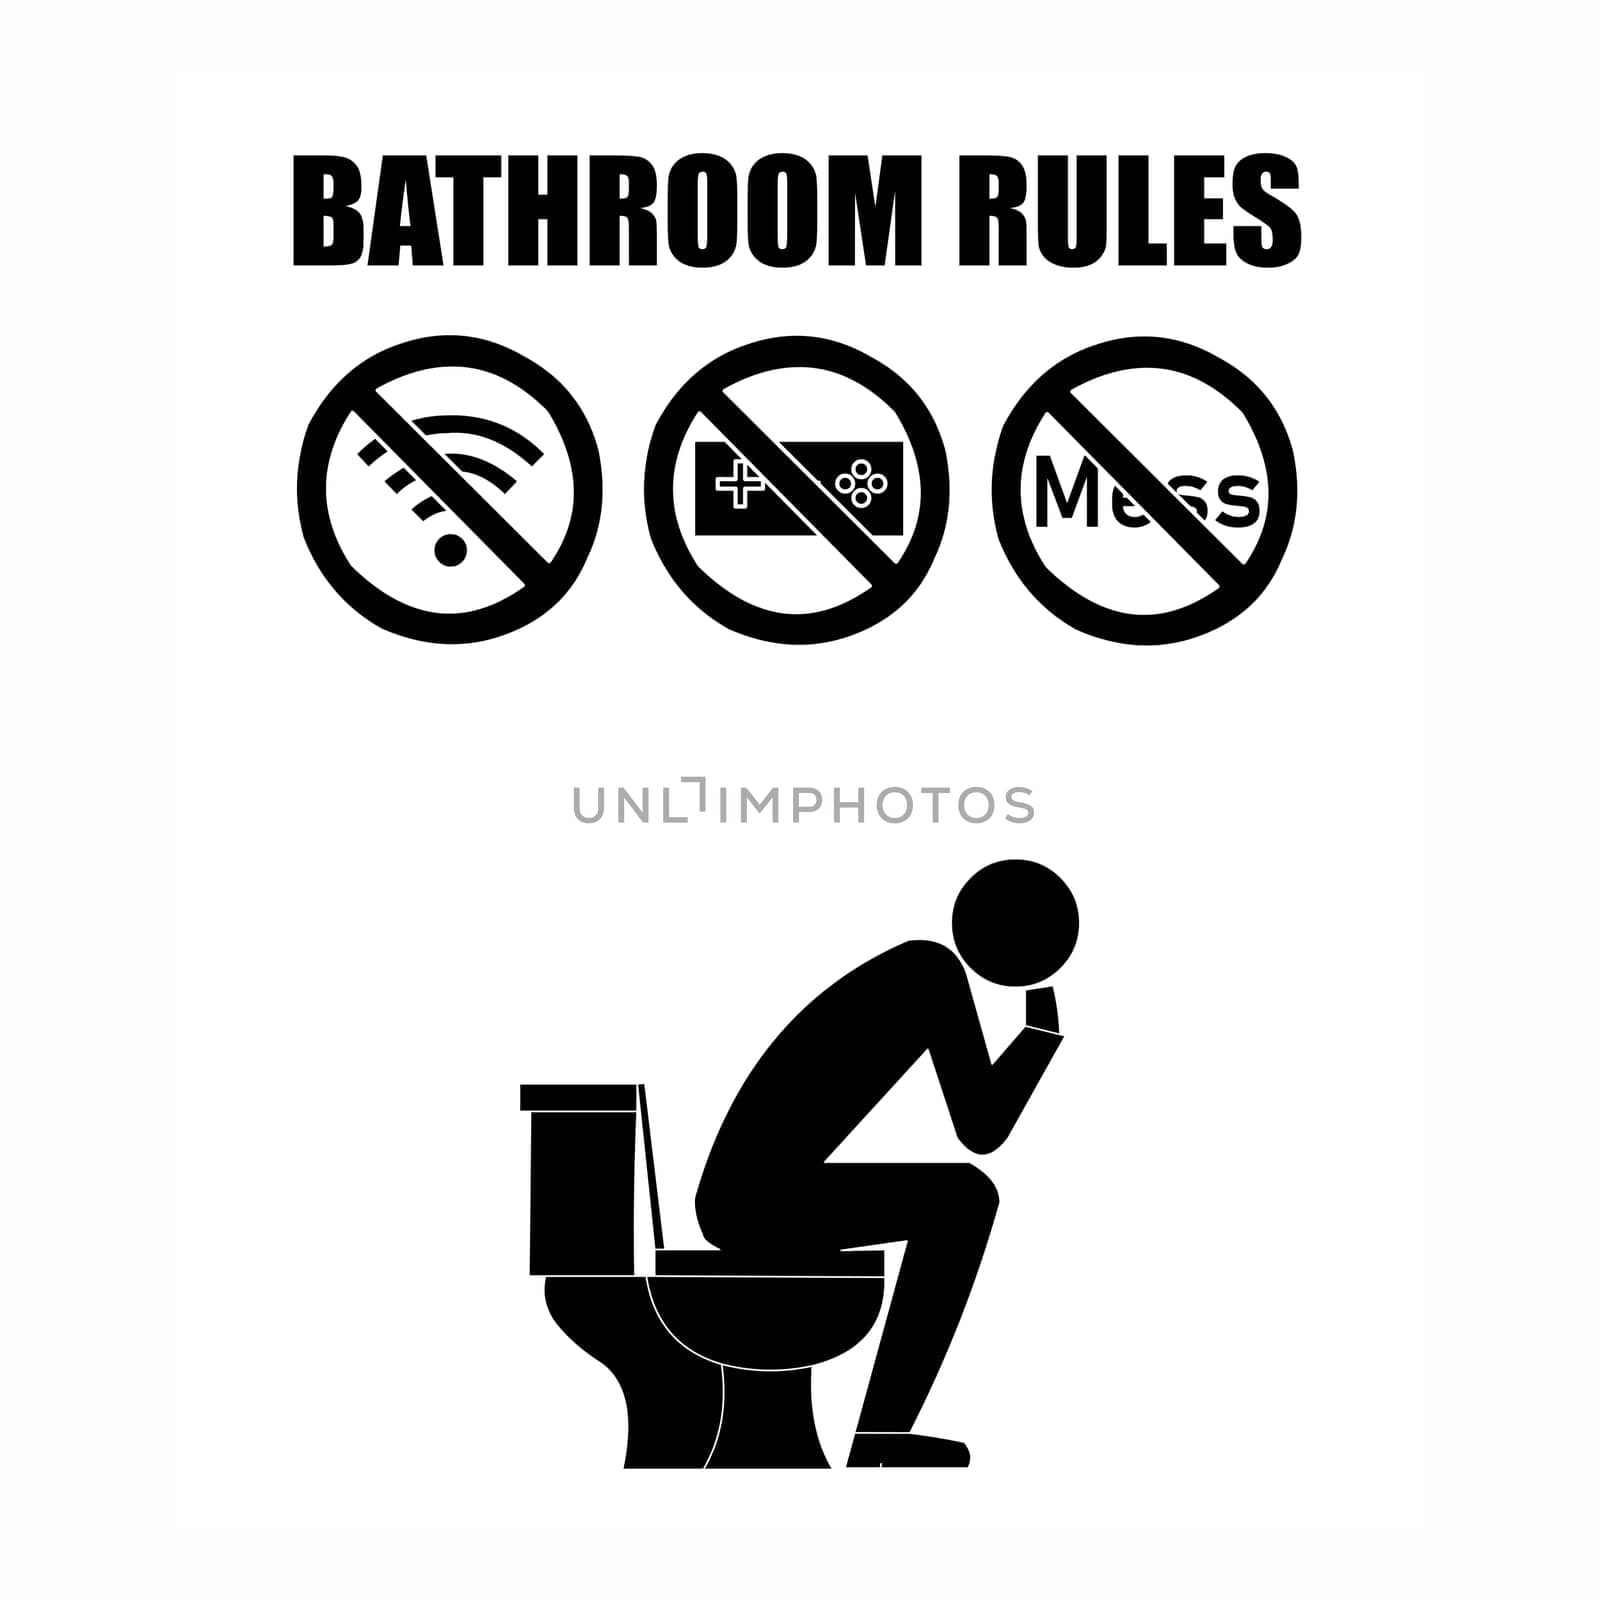 A set of bathroom rules with a person seating on the toilet.